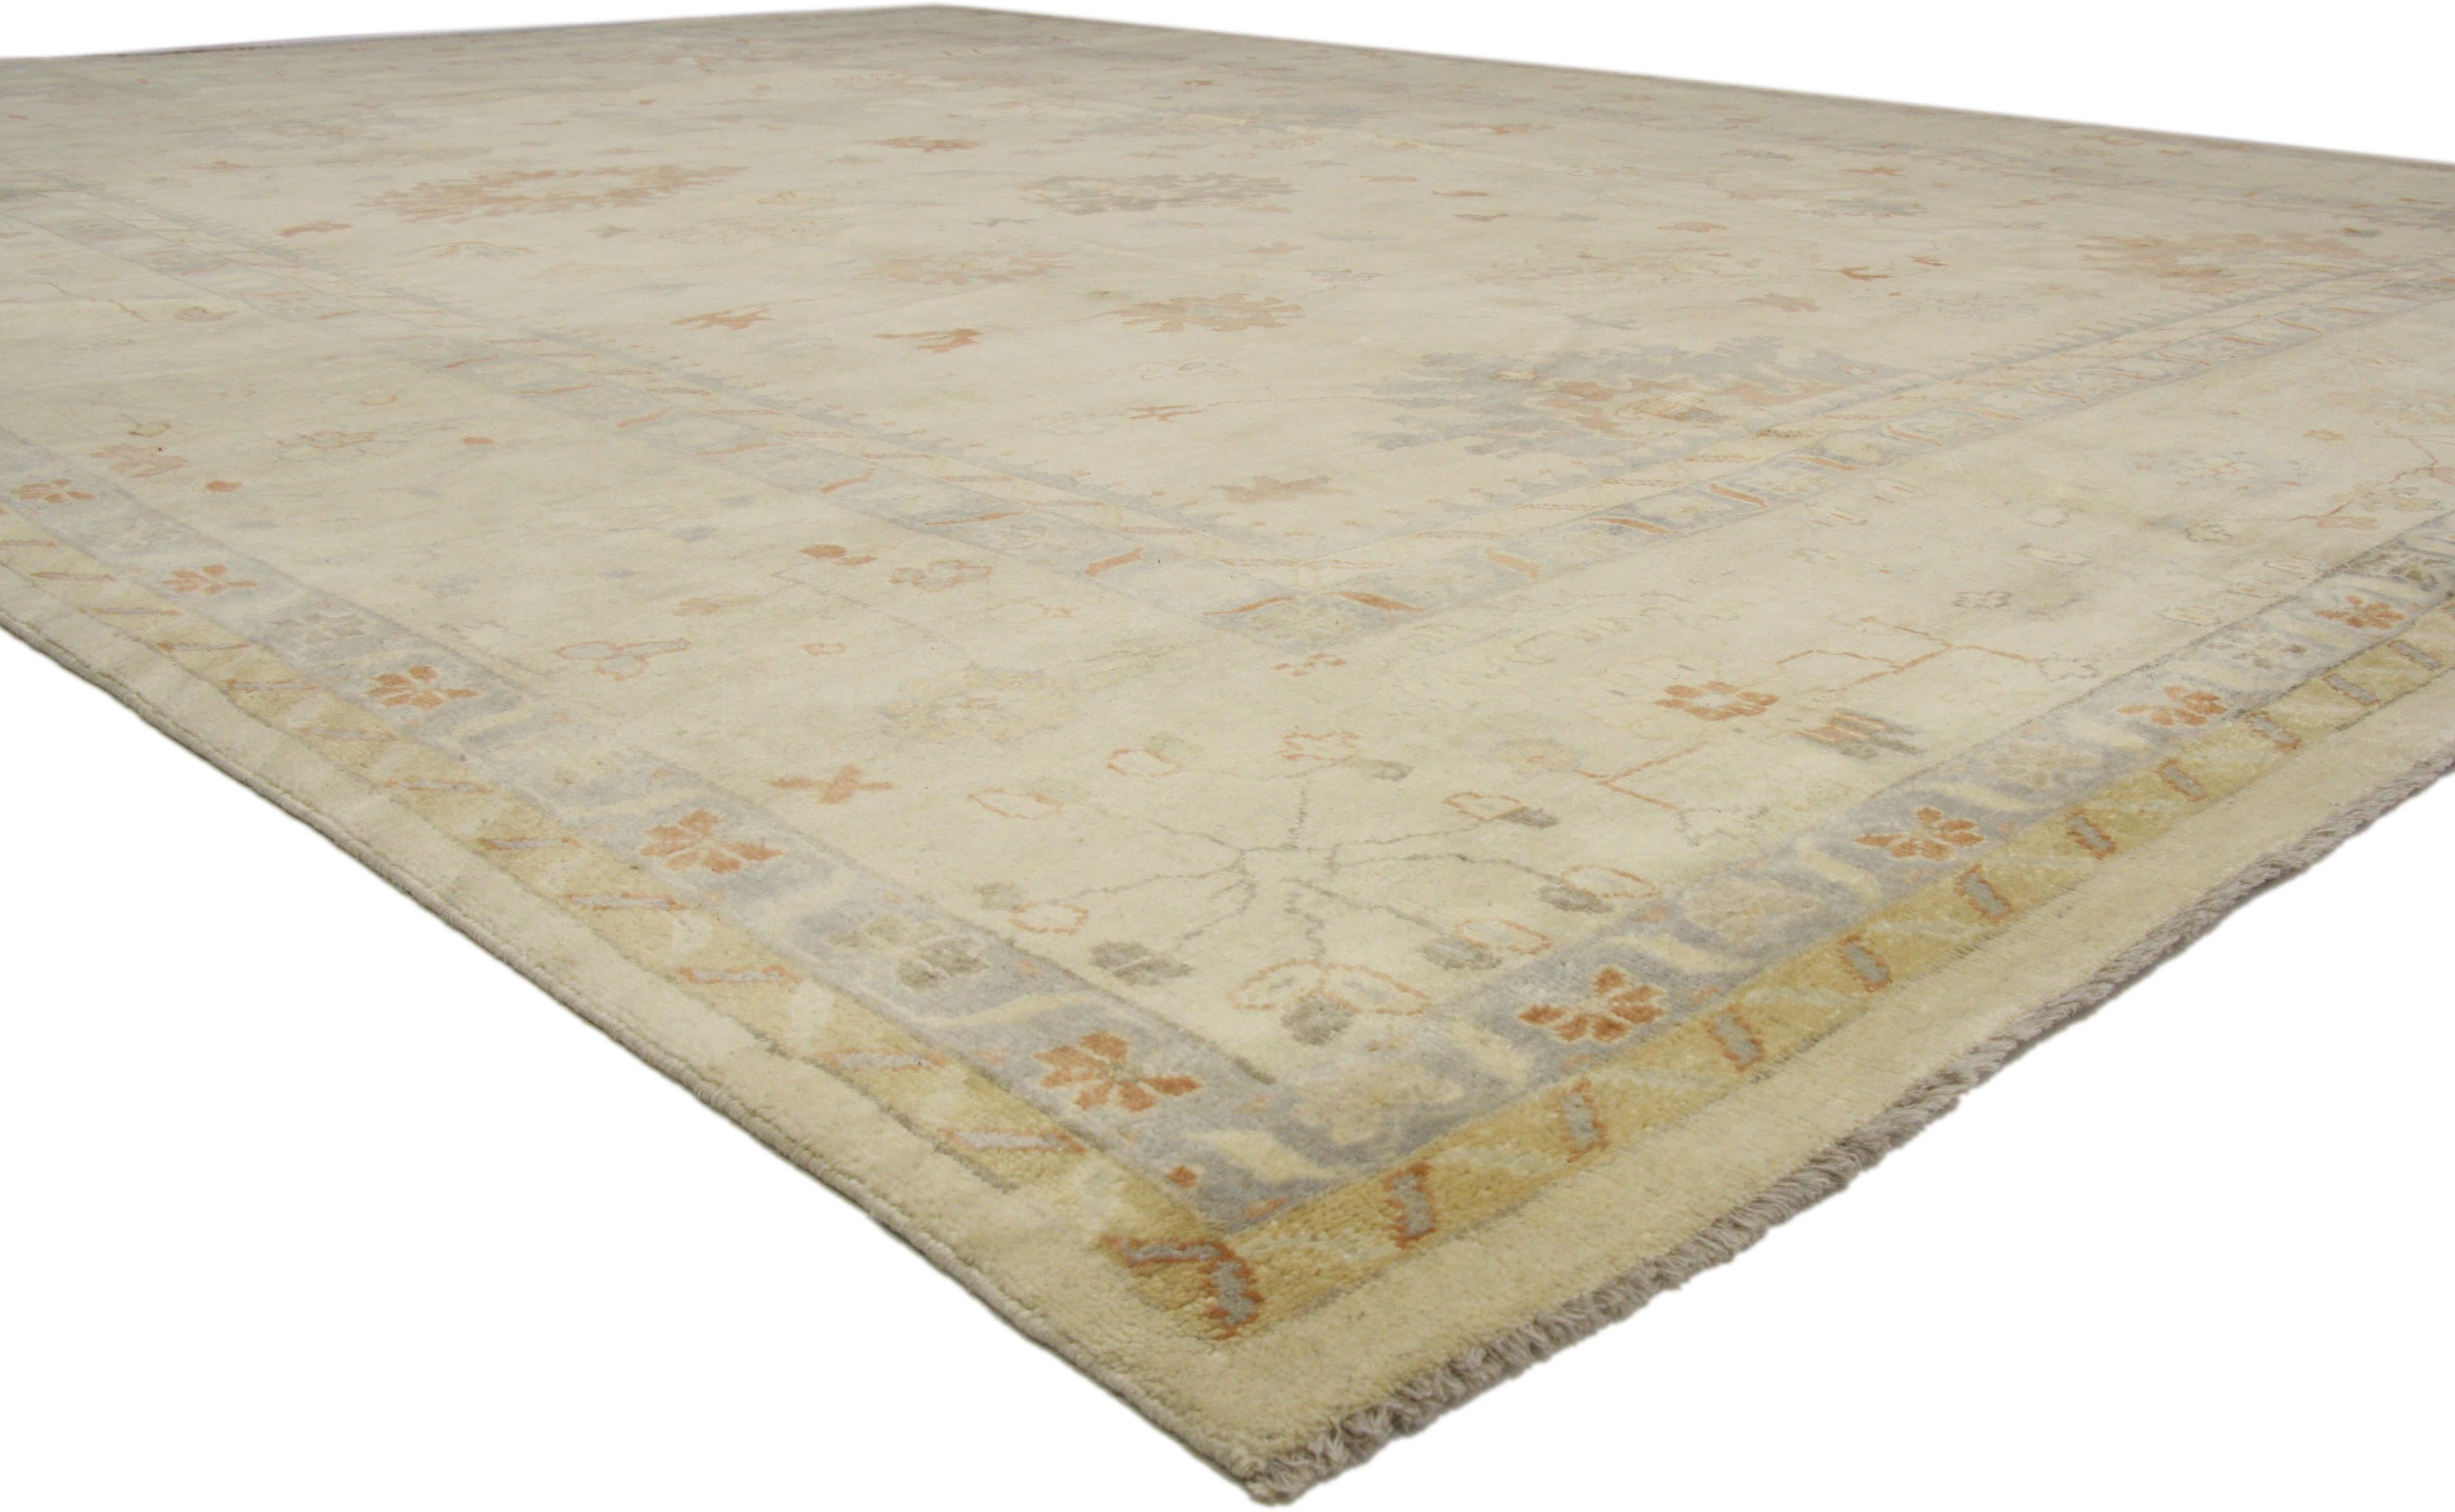 30059 Large Transitional Area Rug with Oushak Design in Light Colors. This hand-knotted wool large transitional area rug features an Oushak design in light colors. It is sophisticated and subtle while blending traditional with modern without